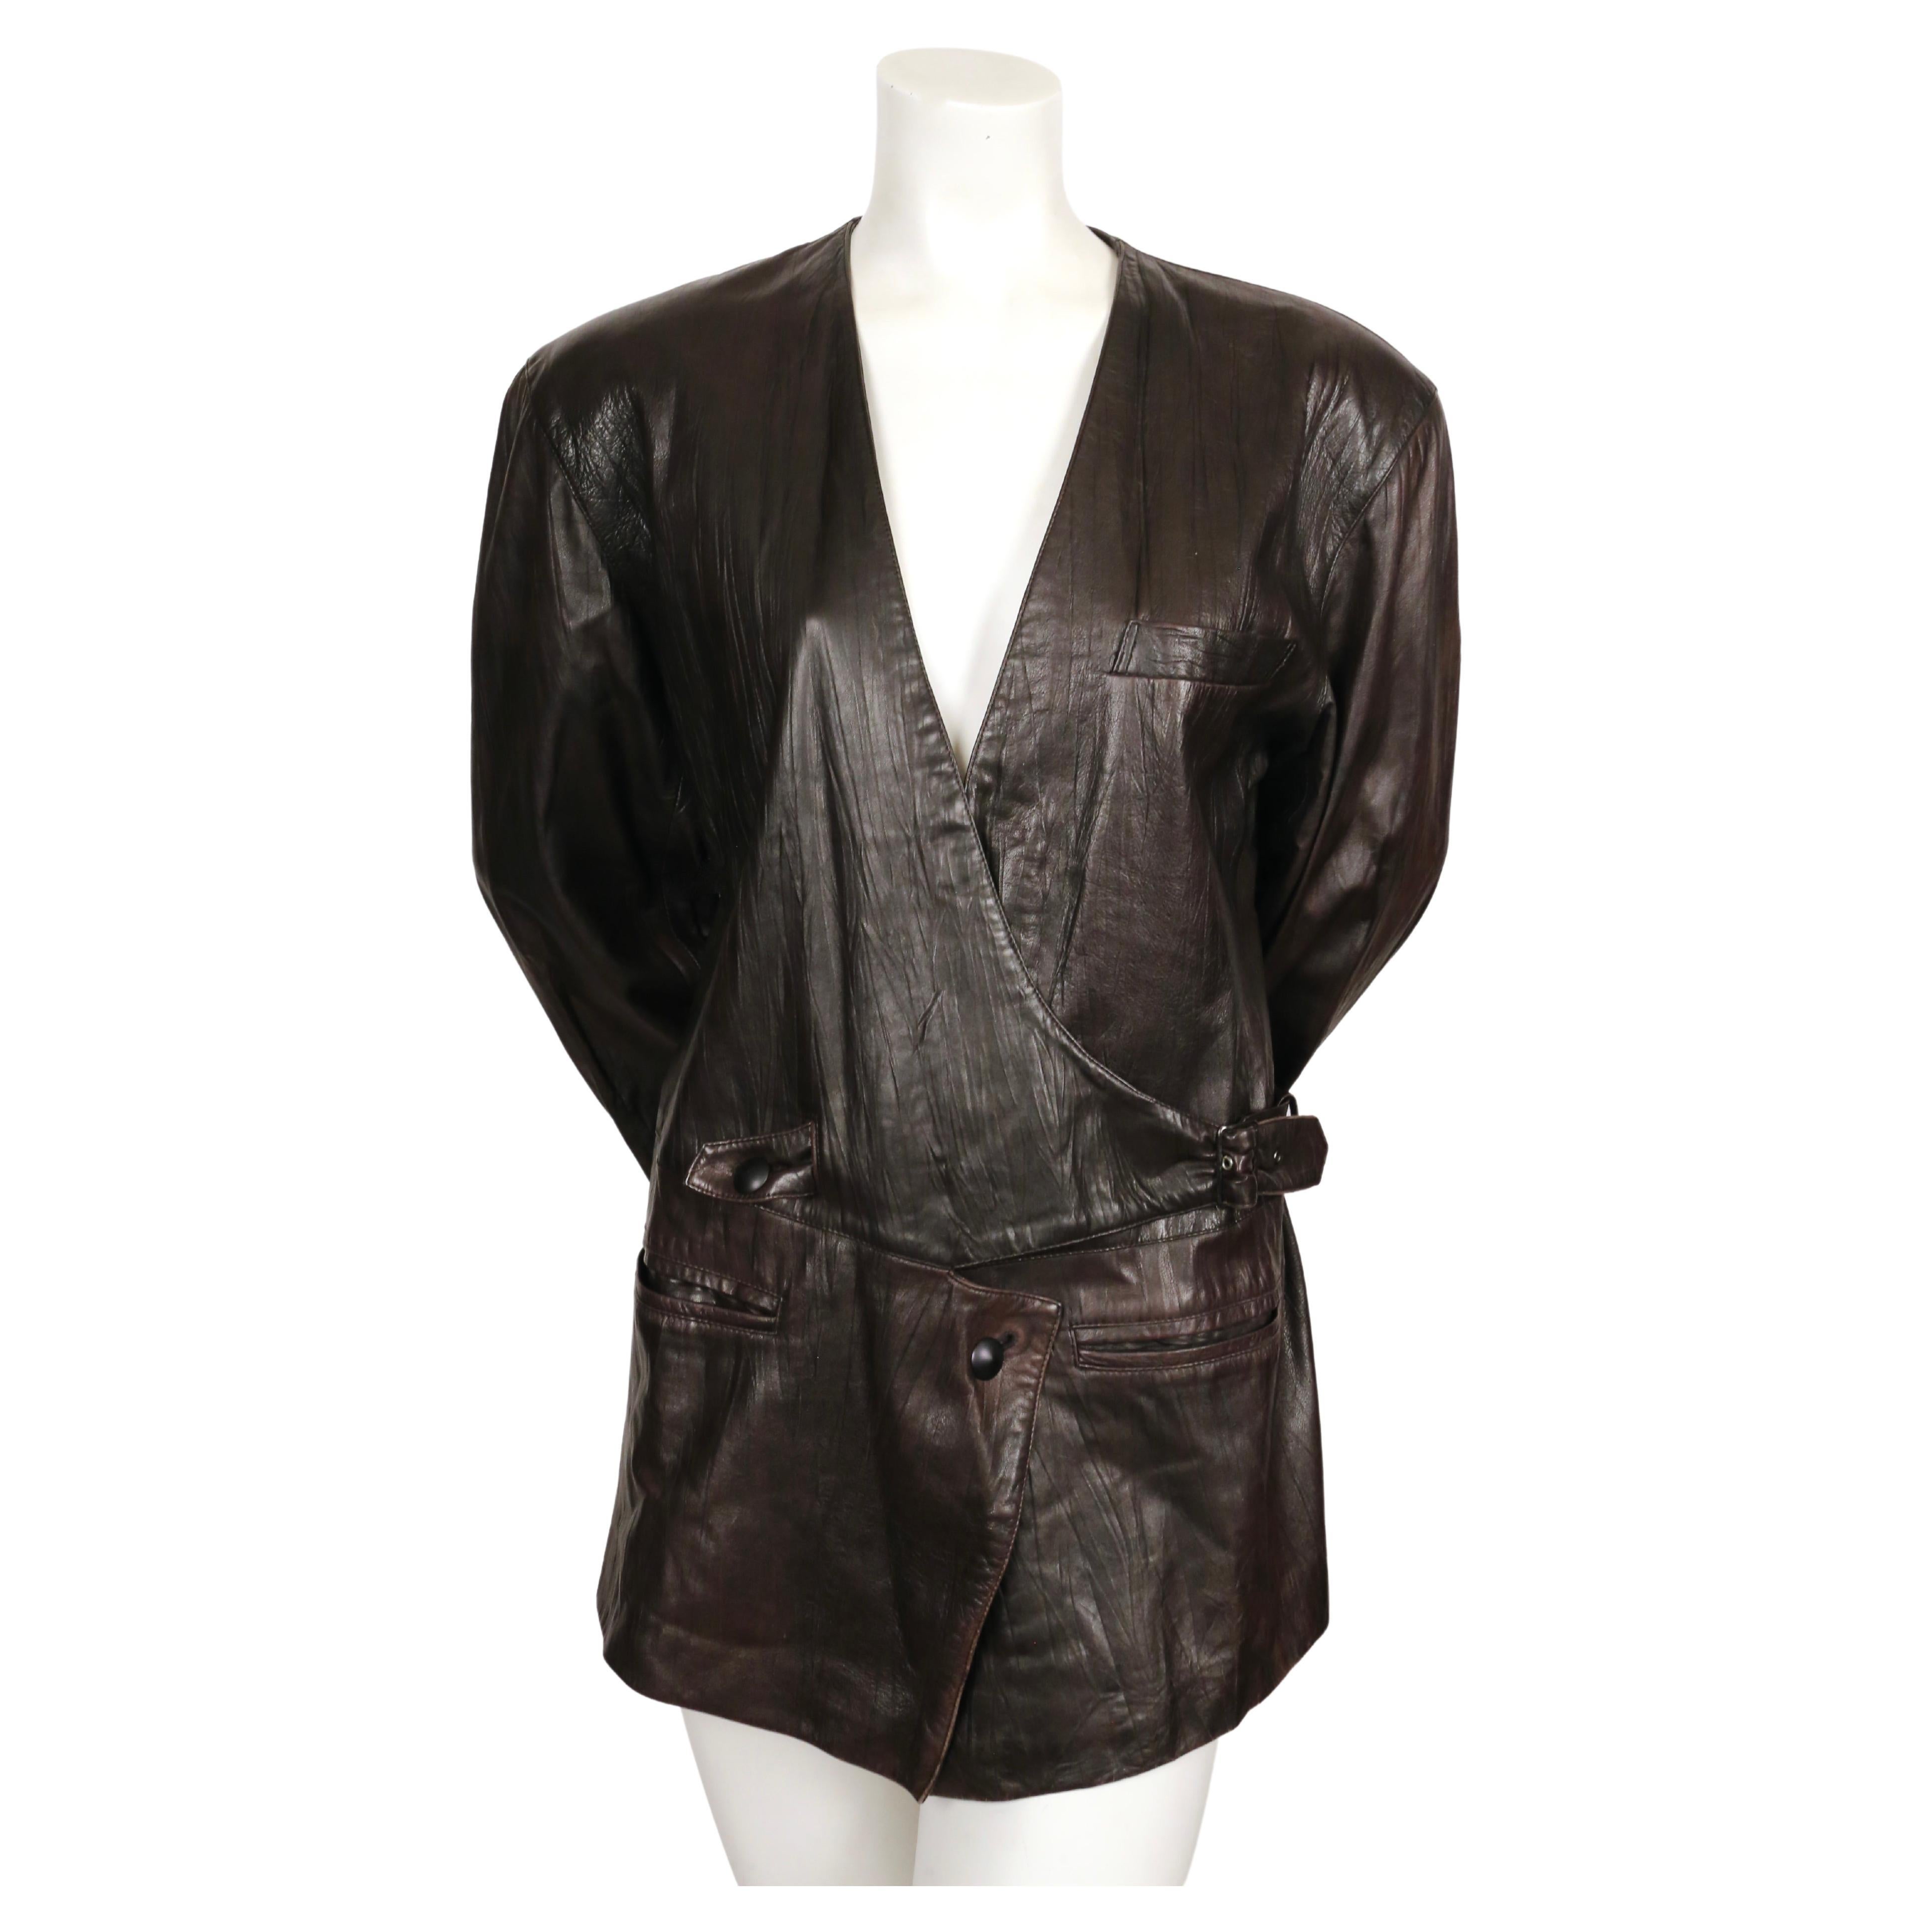 Unusual, dark-brown, collarless, textured leather jacket with oversized shoulders and buckle closure designed by Issey Miyake dating to the early 1980's. Japanese size 'S' which best fits a US 4-8. Approximate measurements: shoulder 18.5